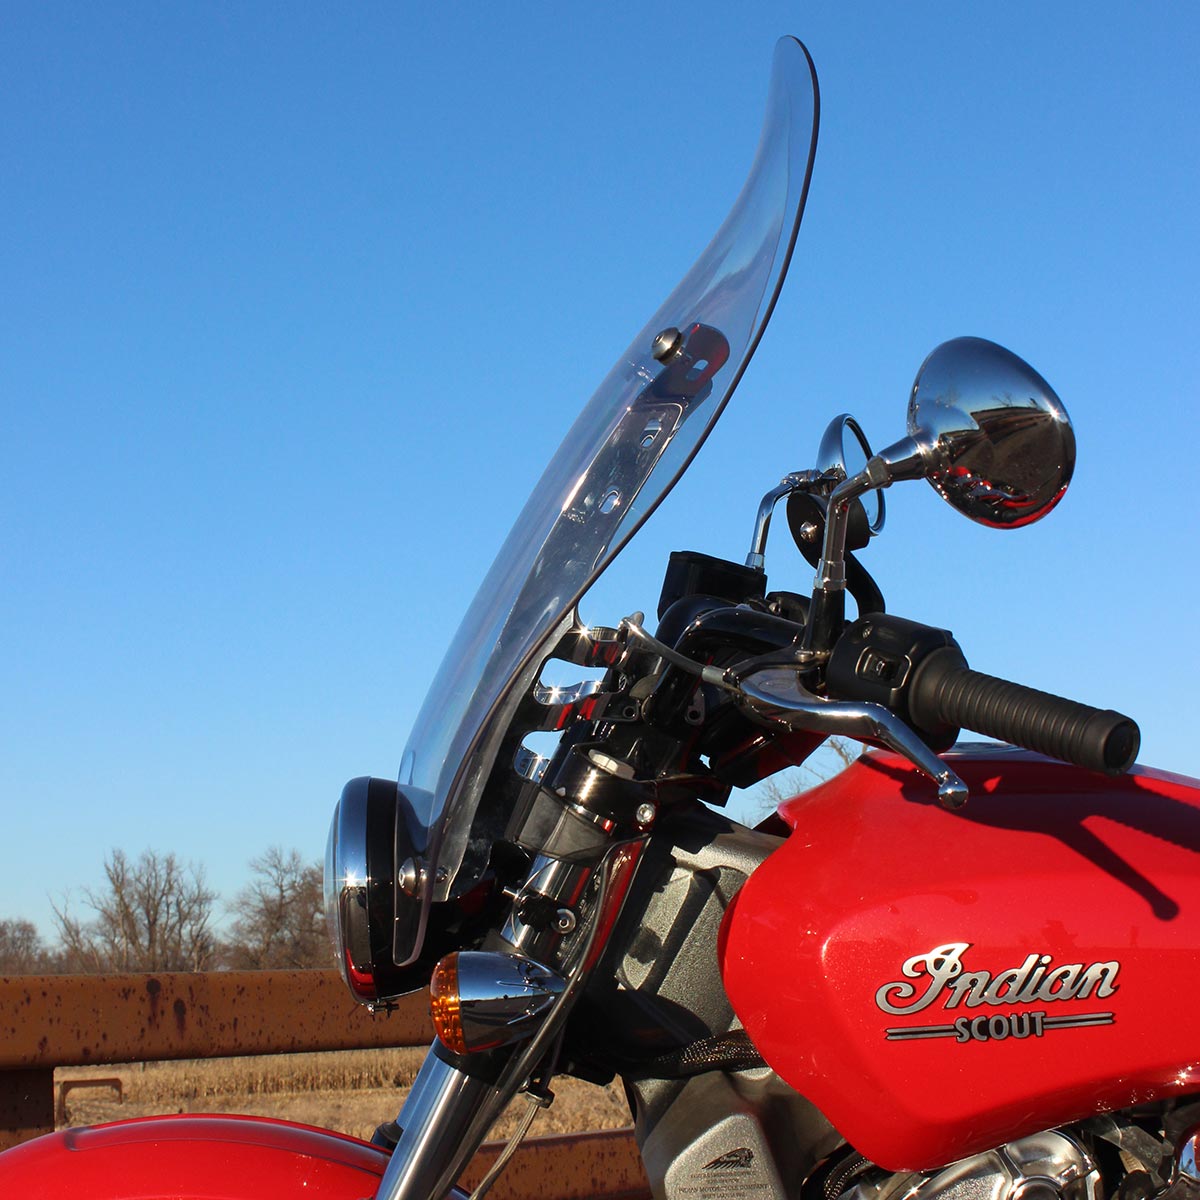 Tint Flare™ Windshield Air Management Kit For Indian® Scout Motorcycles(Tint)